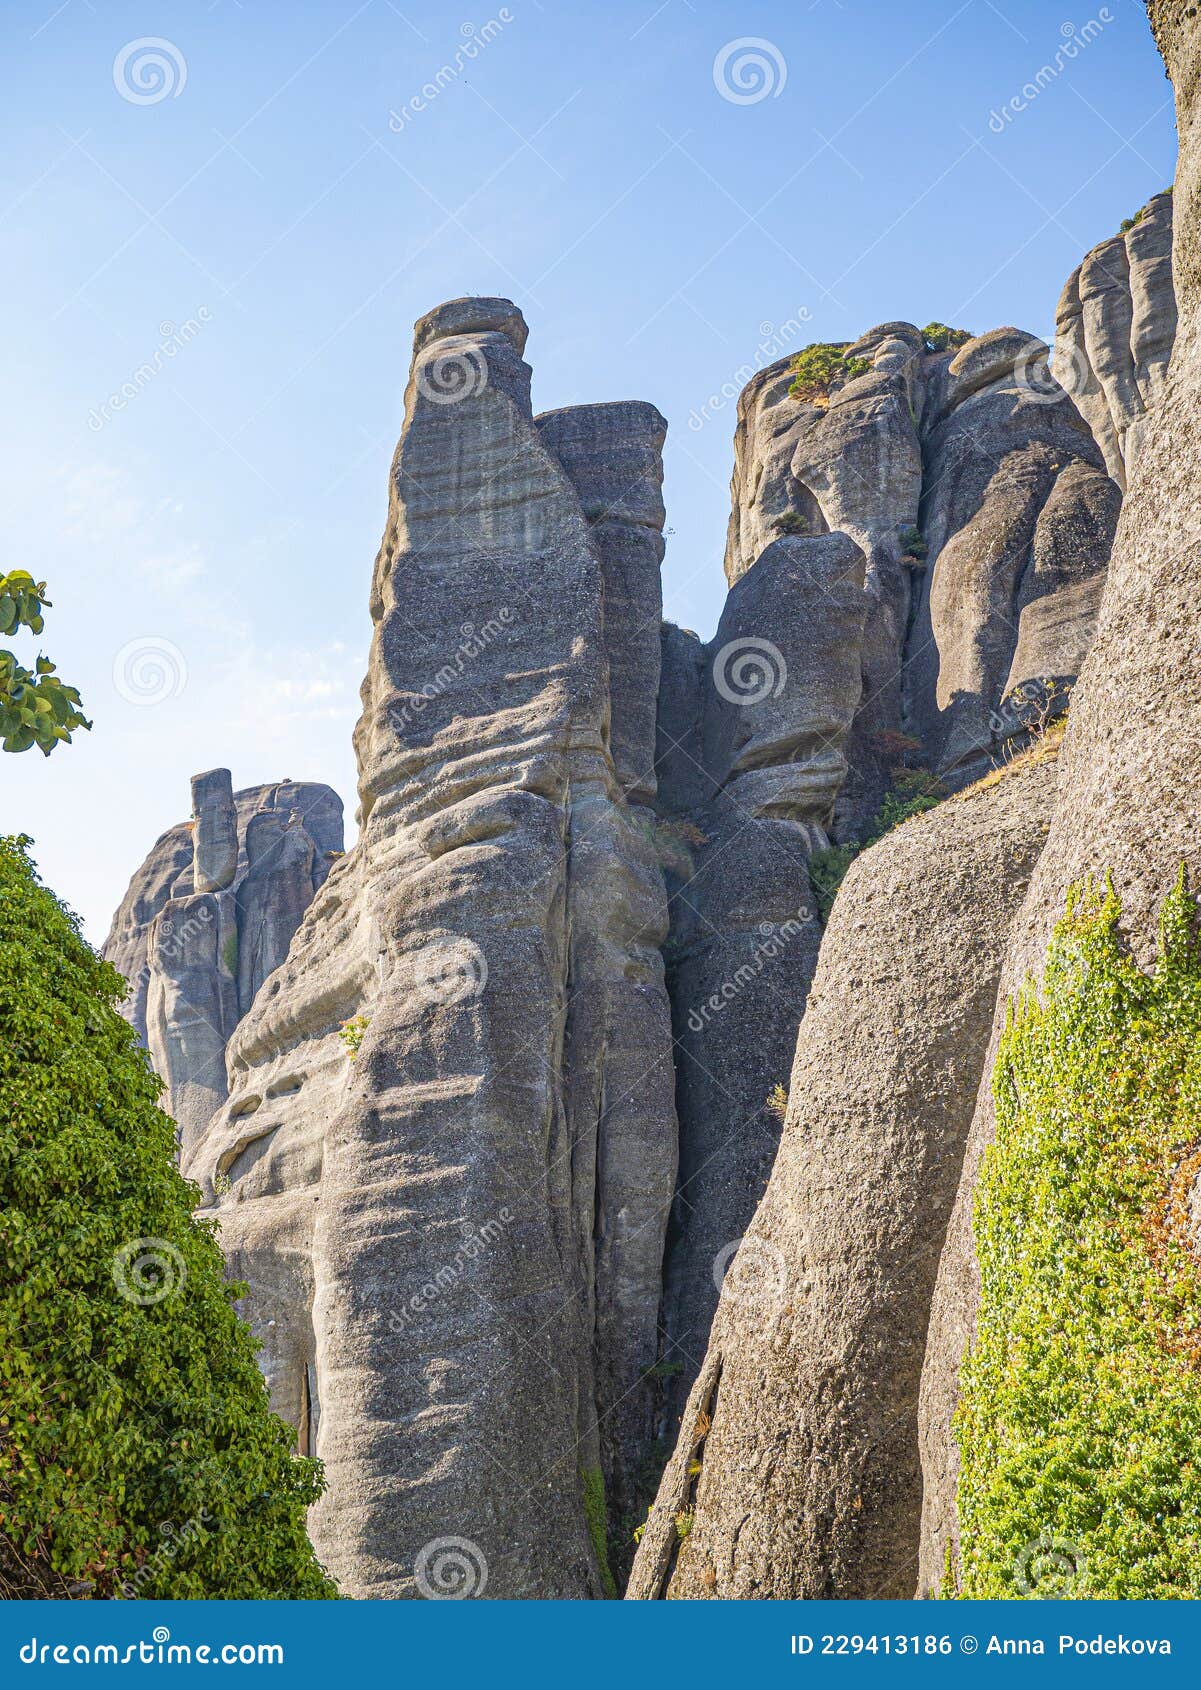 meteora cliffs landscapes. holly monasteries territory.